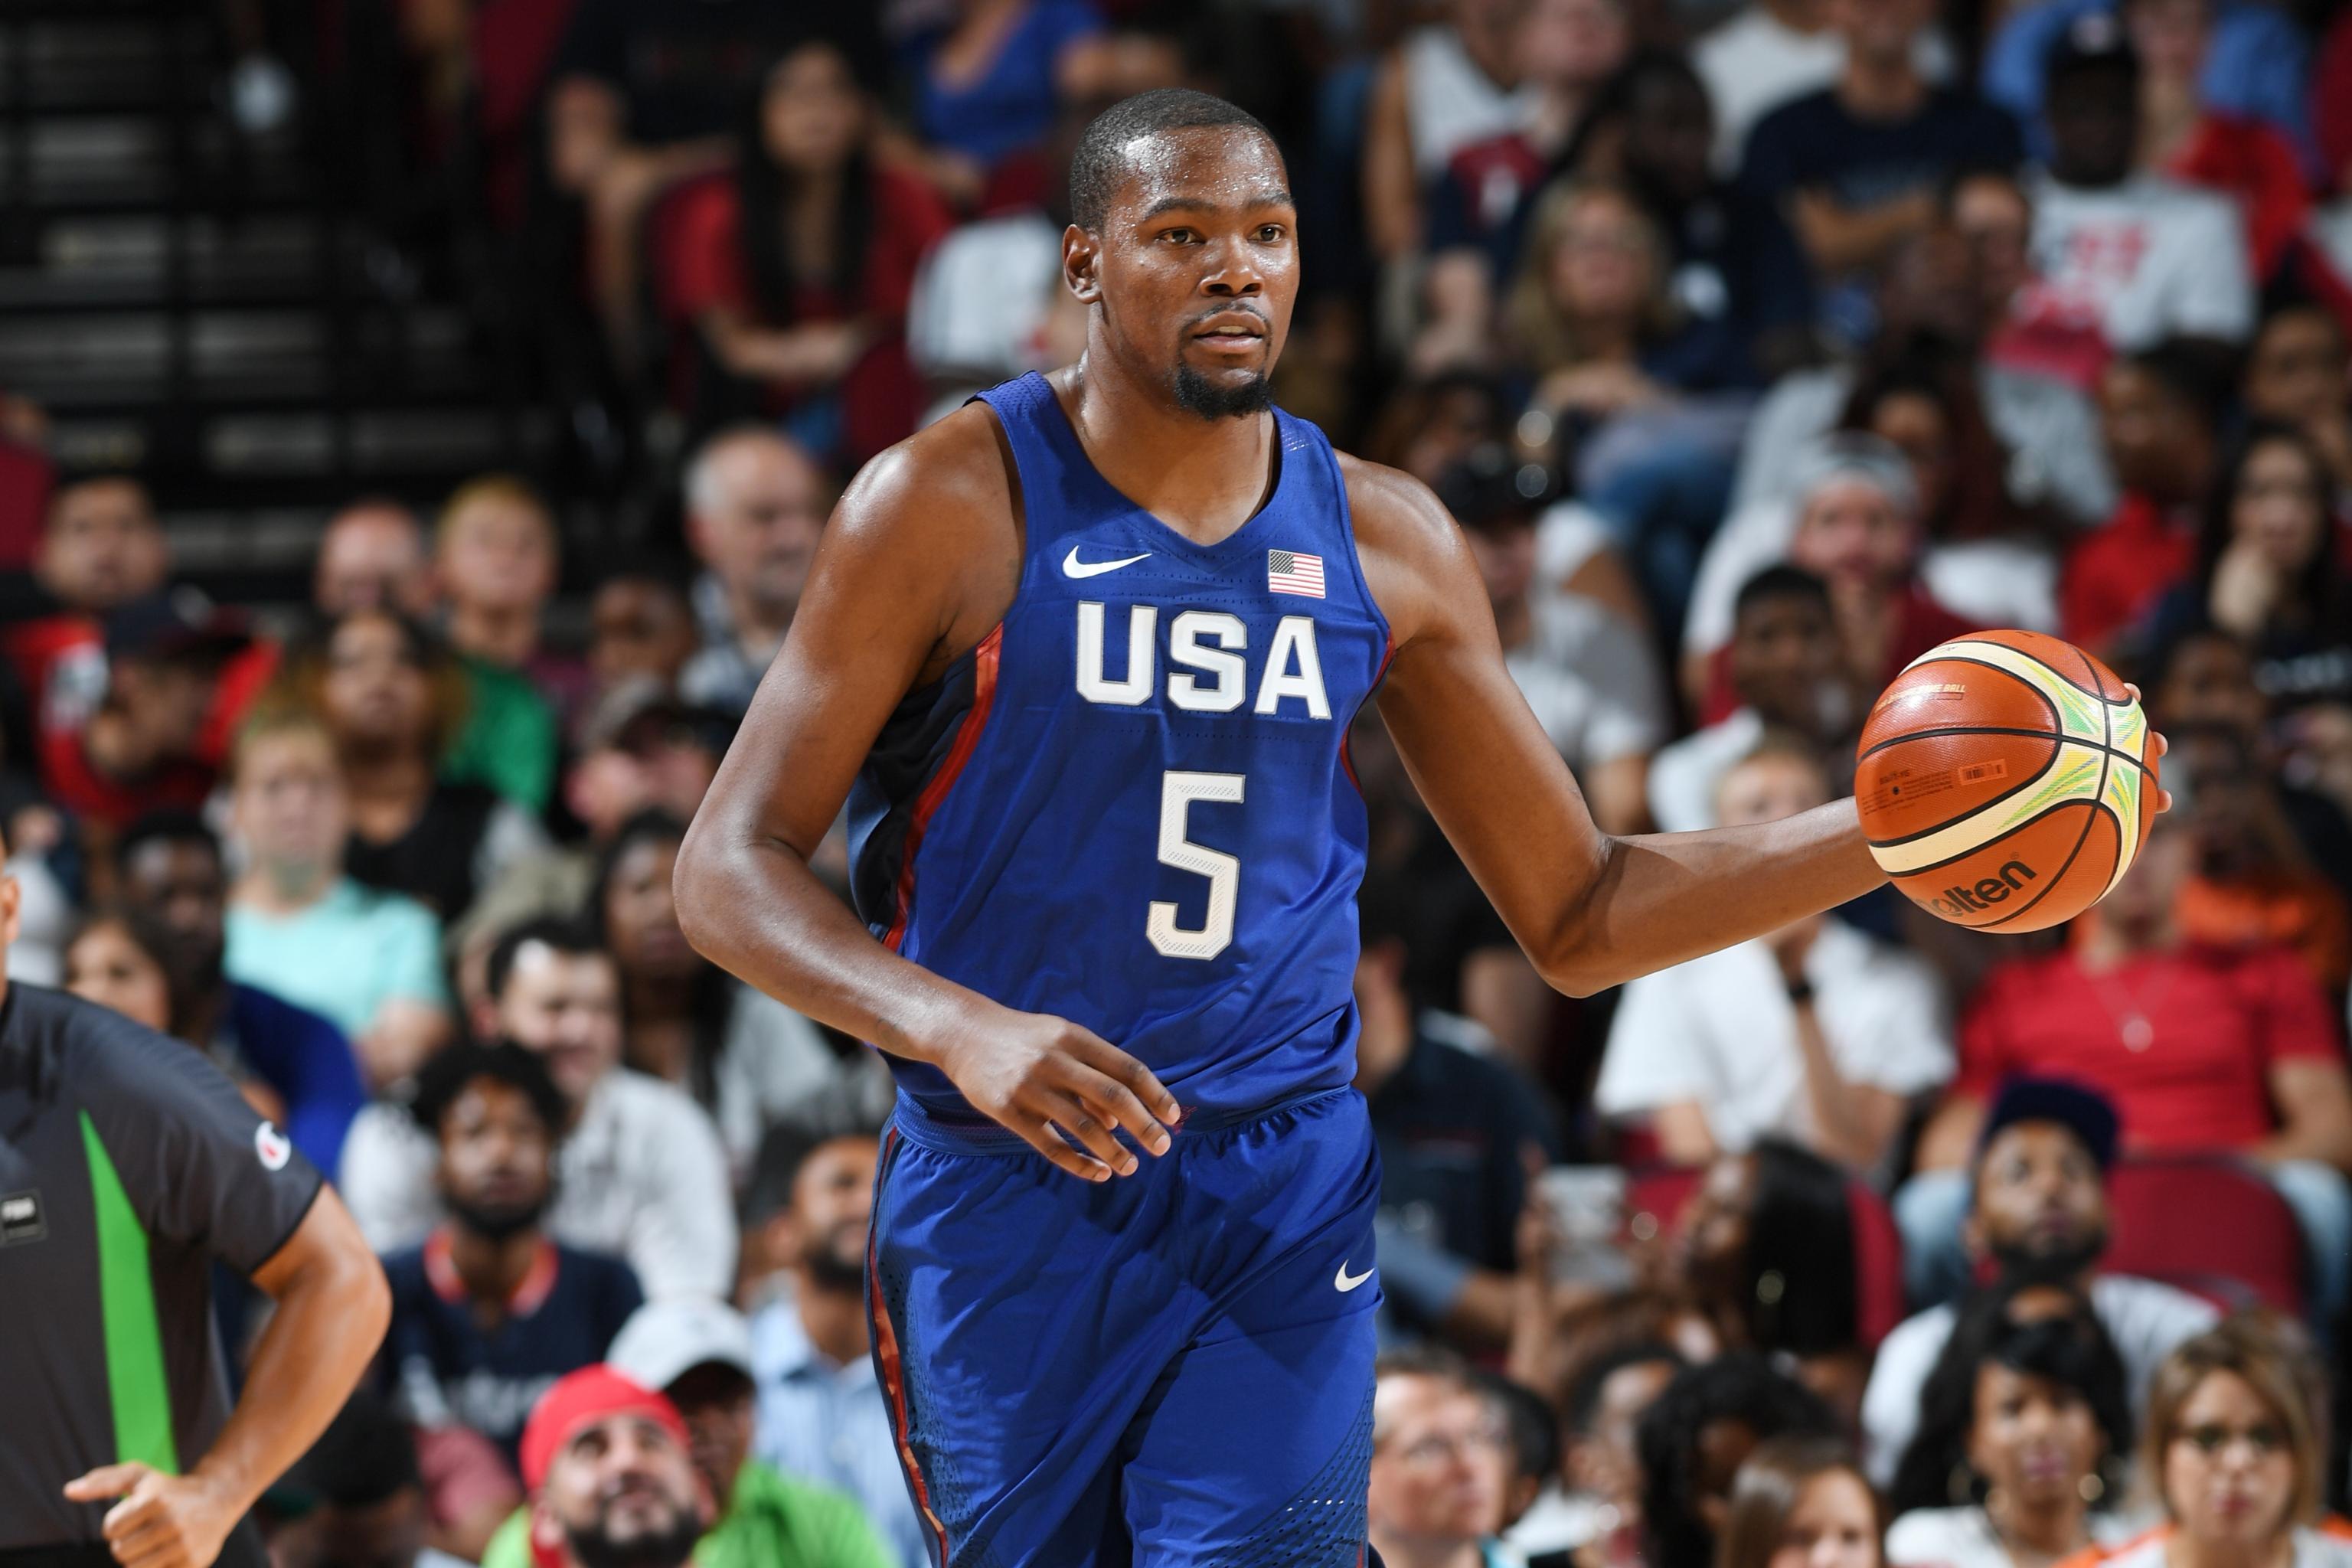 Olympic Basketball 16 Usa Roster Jerseys Schedule Odds And Predictions Bleacher Report Latest News Videos And Highlights